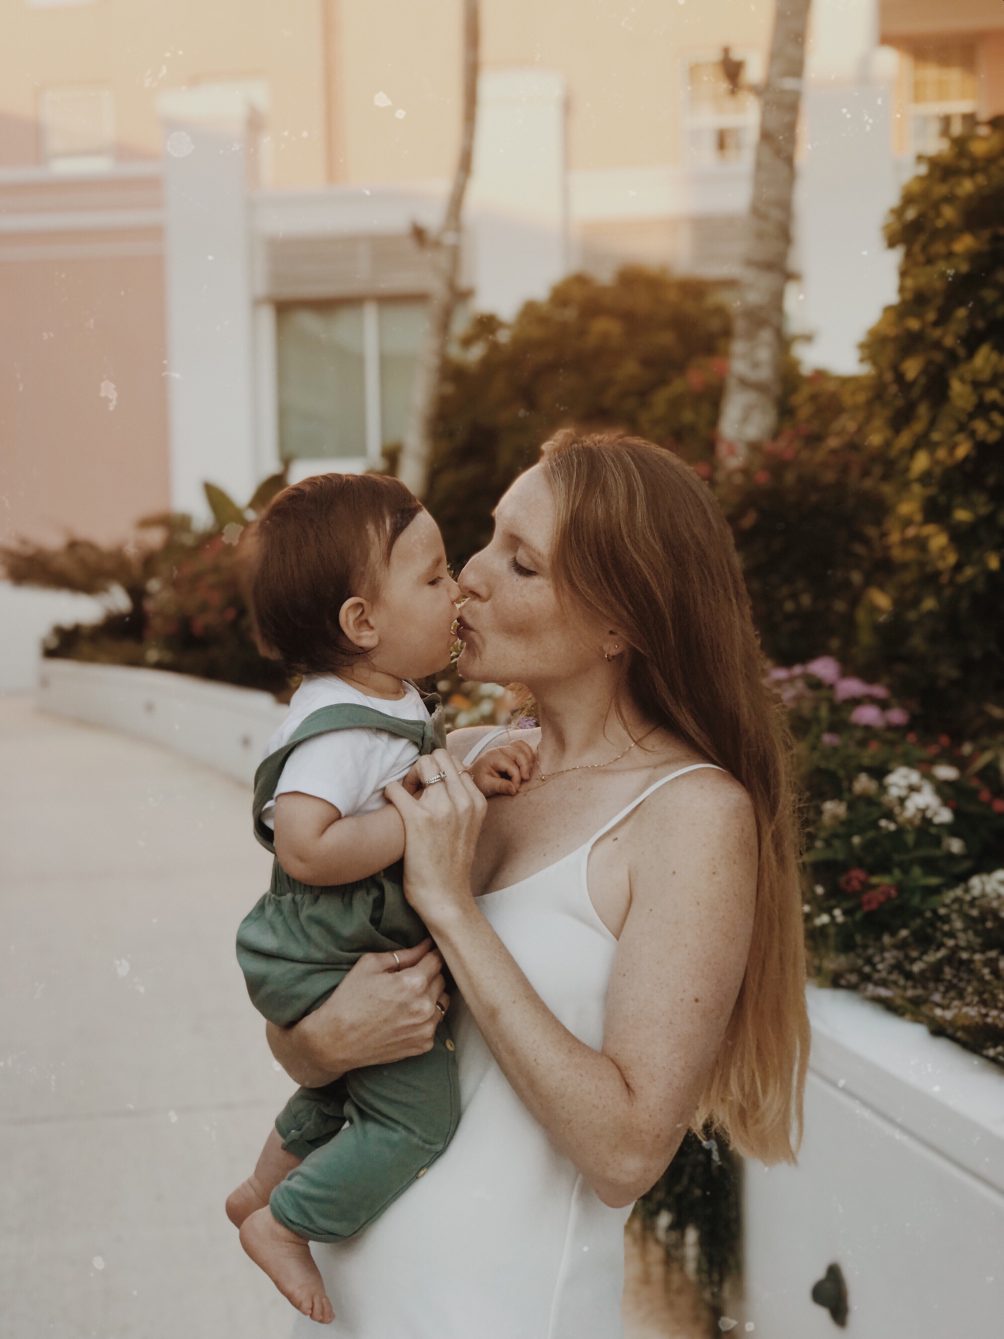 Leslie Musser sharing her favorite motherhood moment so far with her son on the lifestyle blog one brass fox